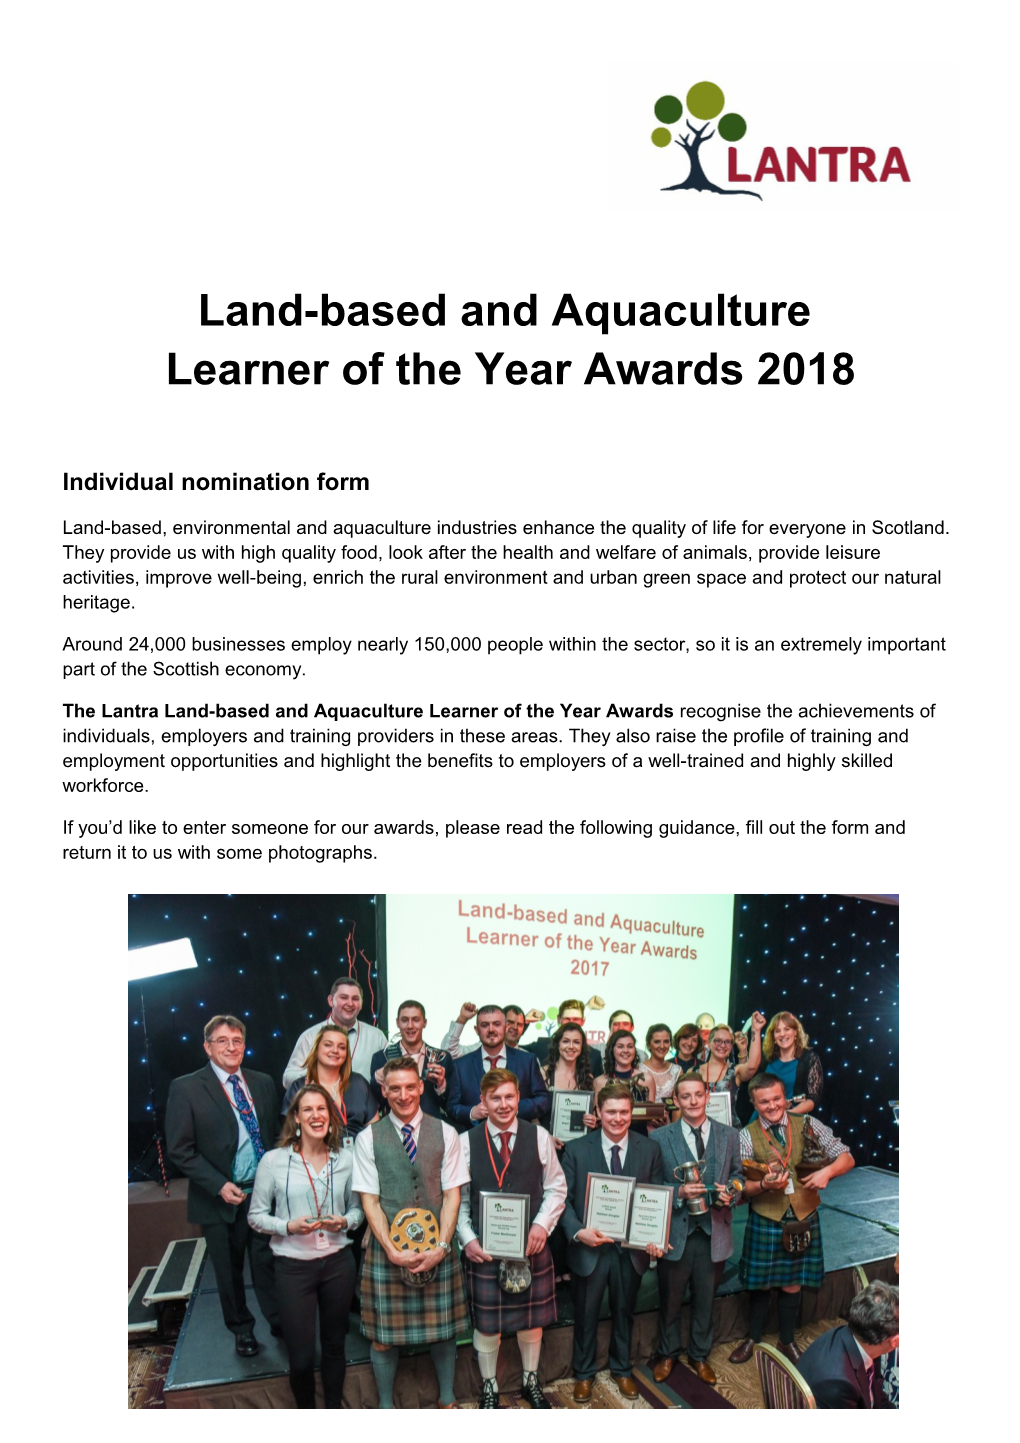 Land-Based and Aquaculture Learner of the Year Awards 2018